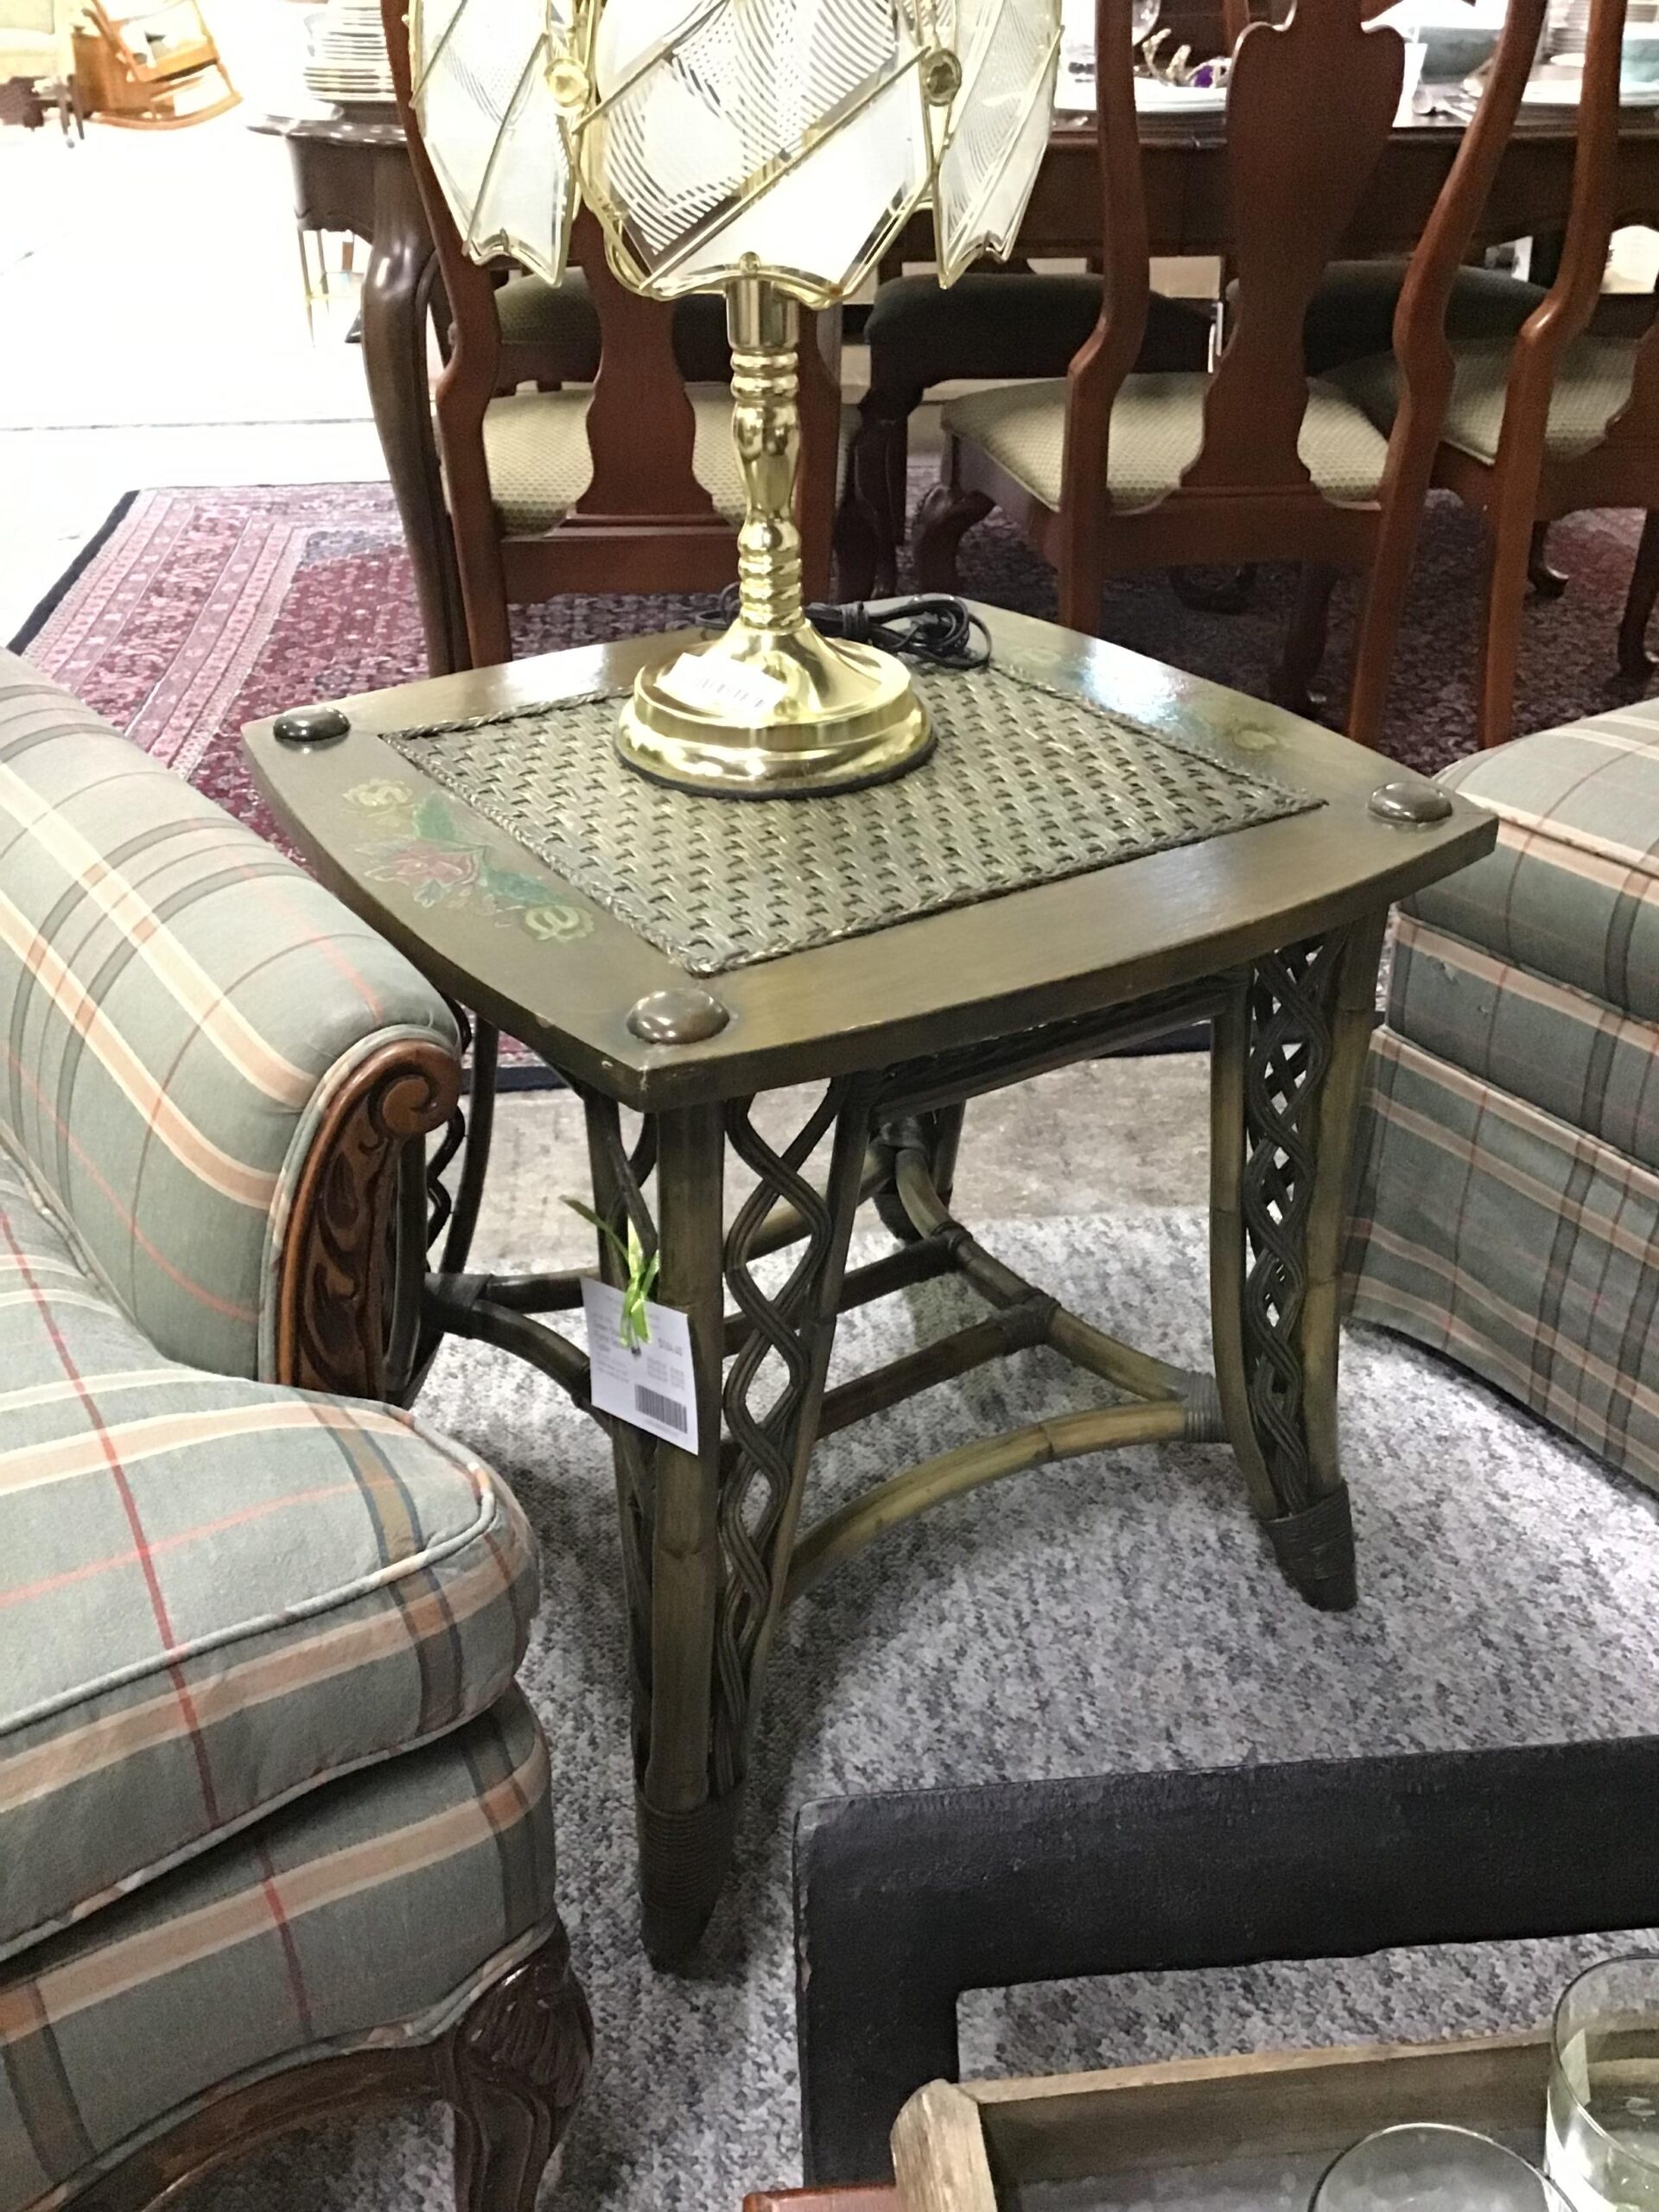 Green Stained/ Floral Square Side Table – Say Good BUY $53.85